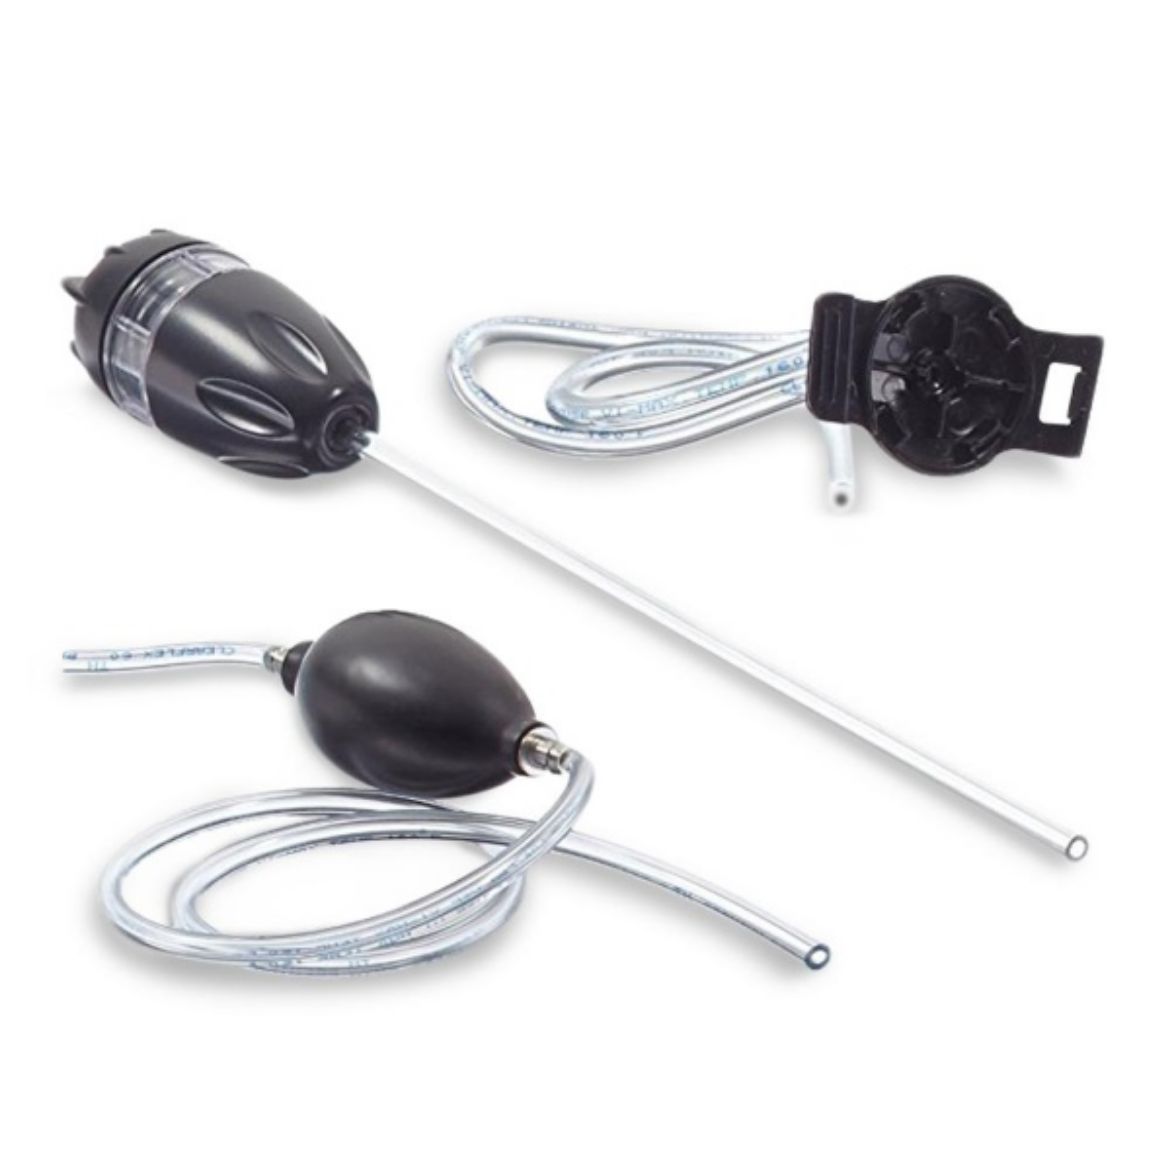 Picture of MANUAL ASPIRATOR PUMP KIT WITH PROBE (1 FT./0.3 M)